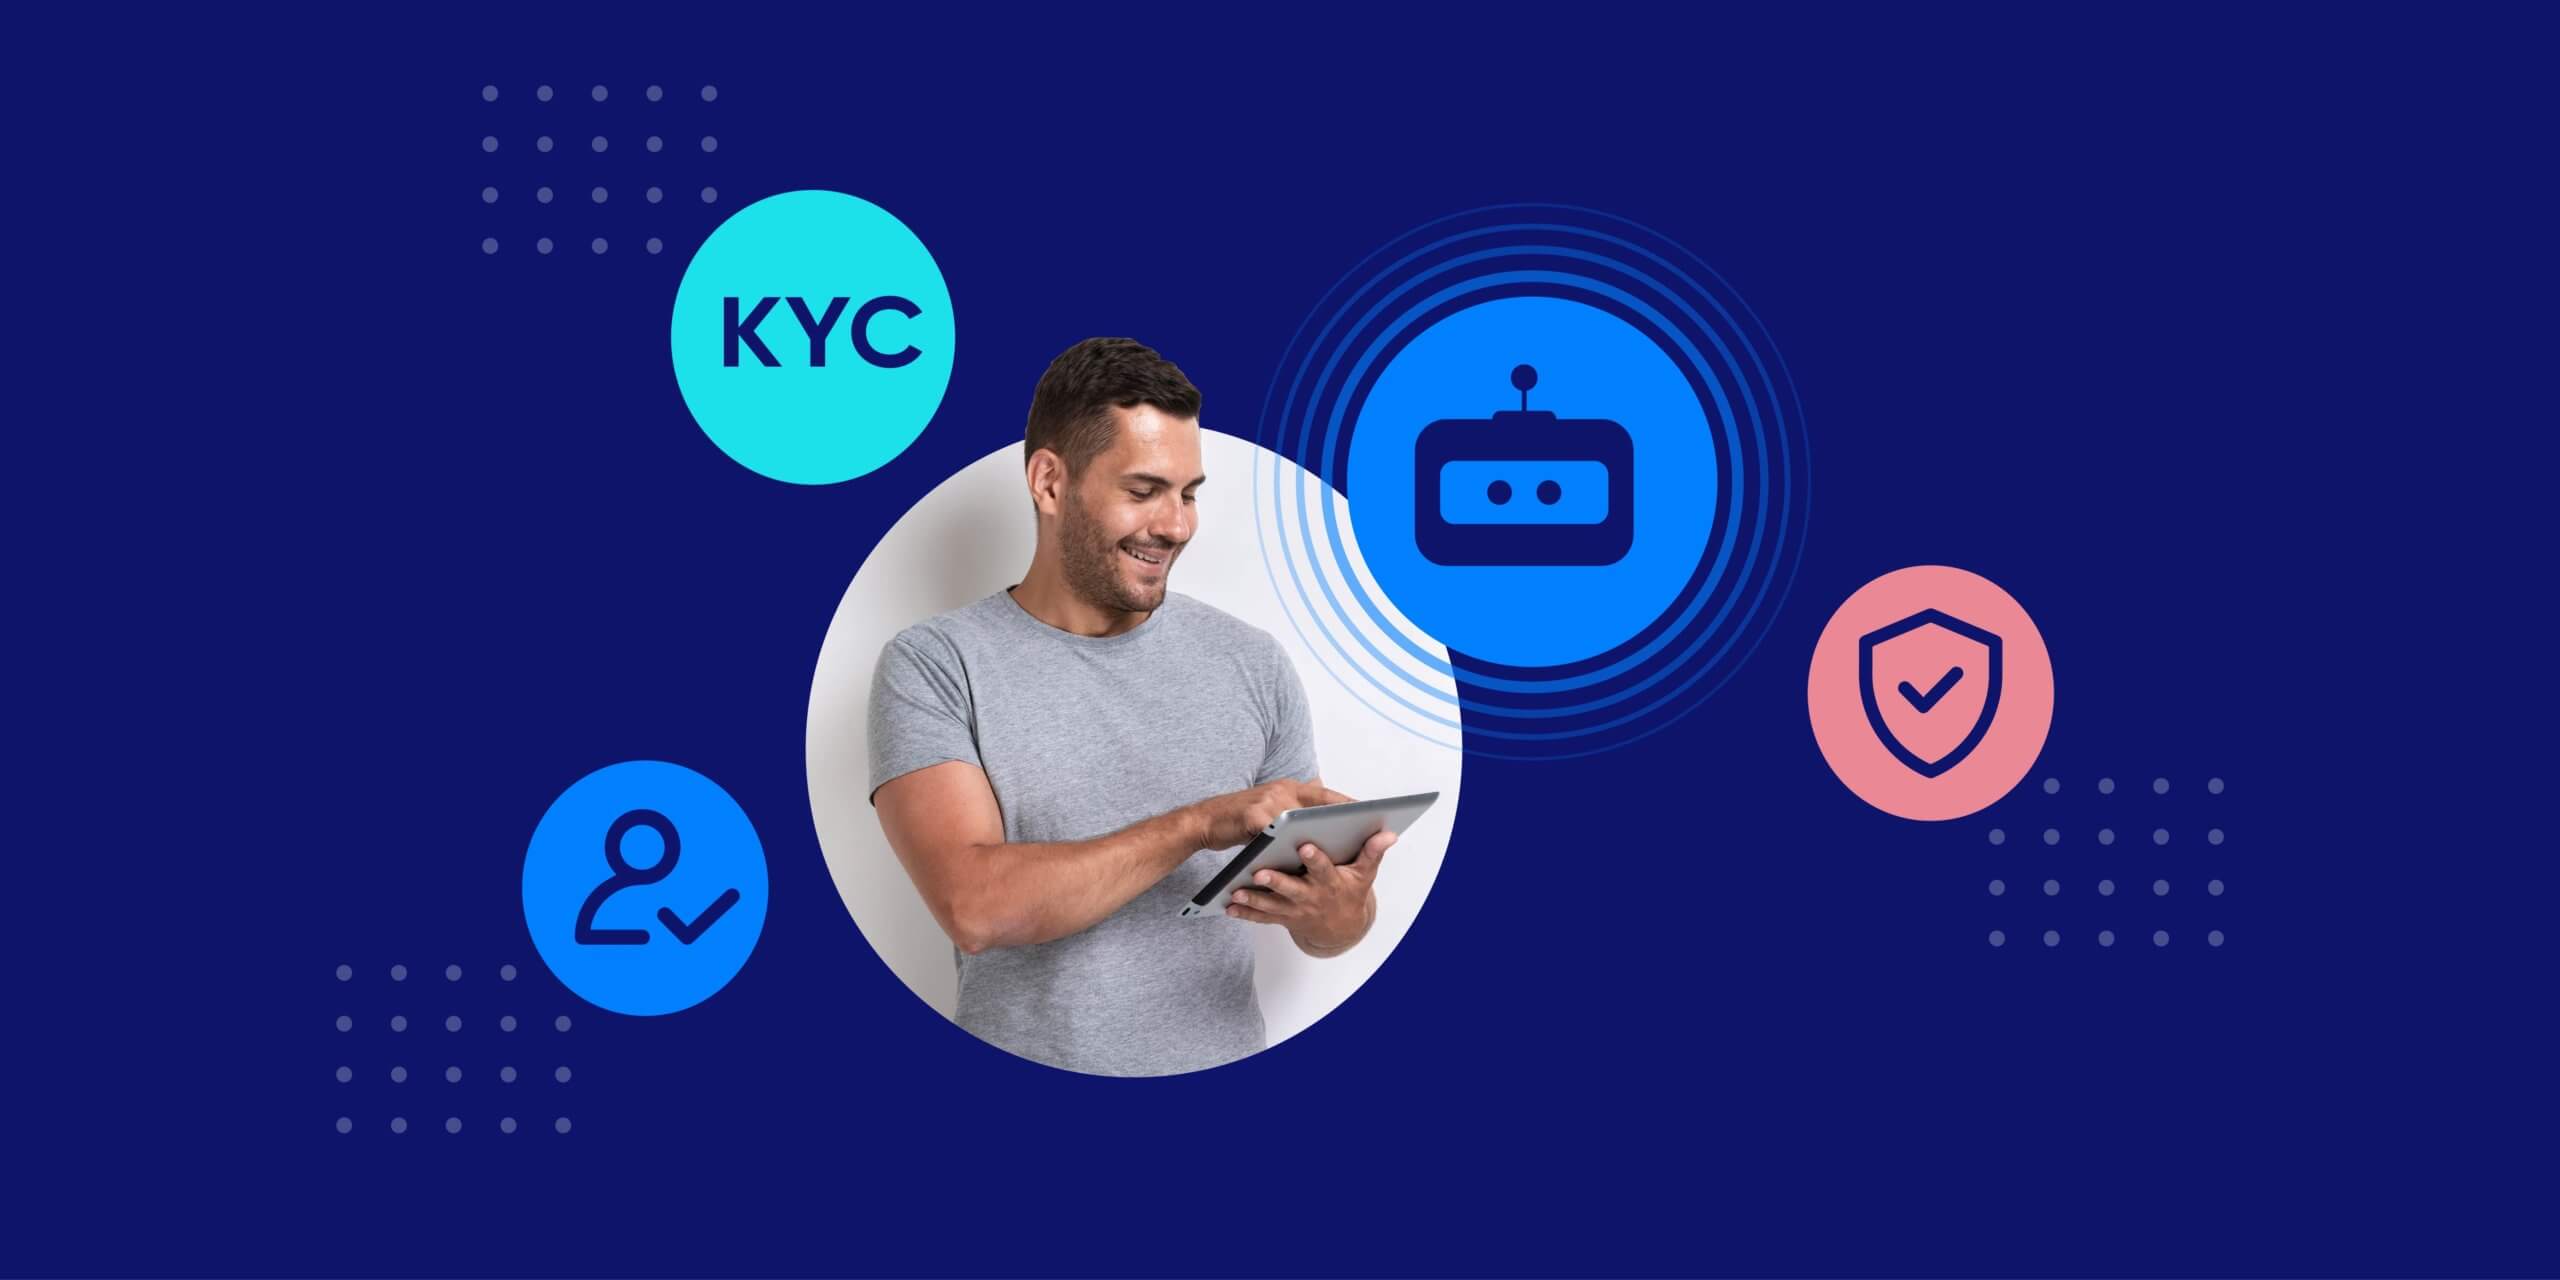 Which is the best outsourcing partner for KYC verification?